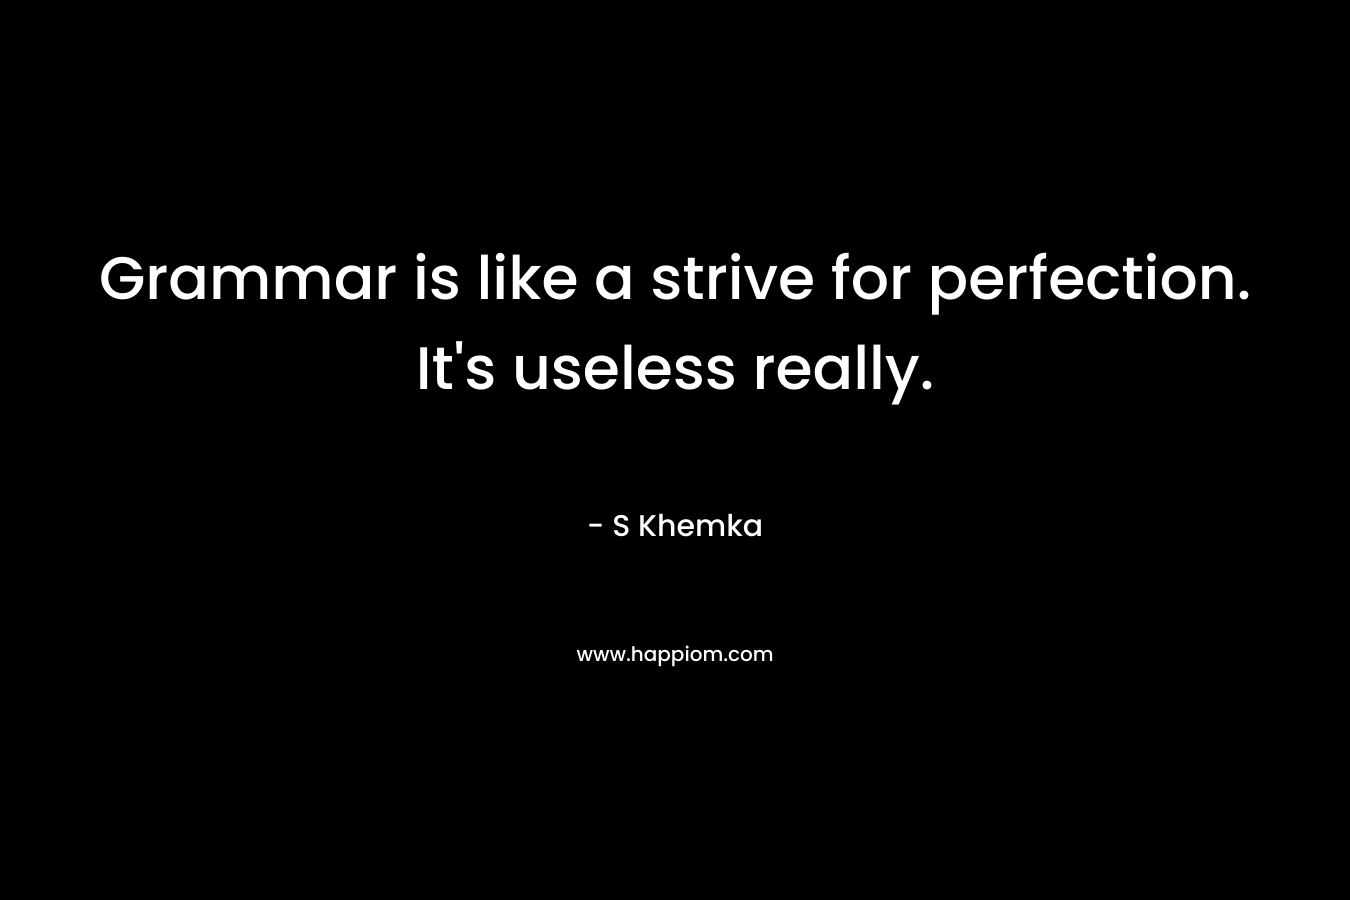 Grammar is like a strive for perfection. It’s useless really. – S Khemka